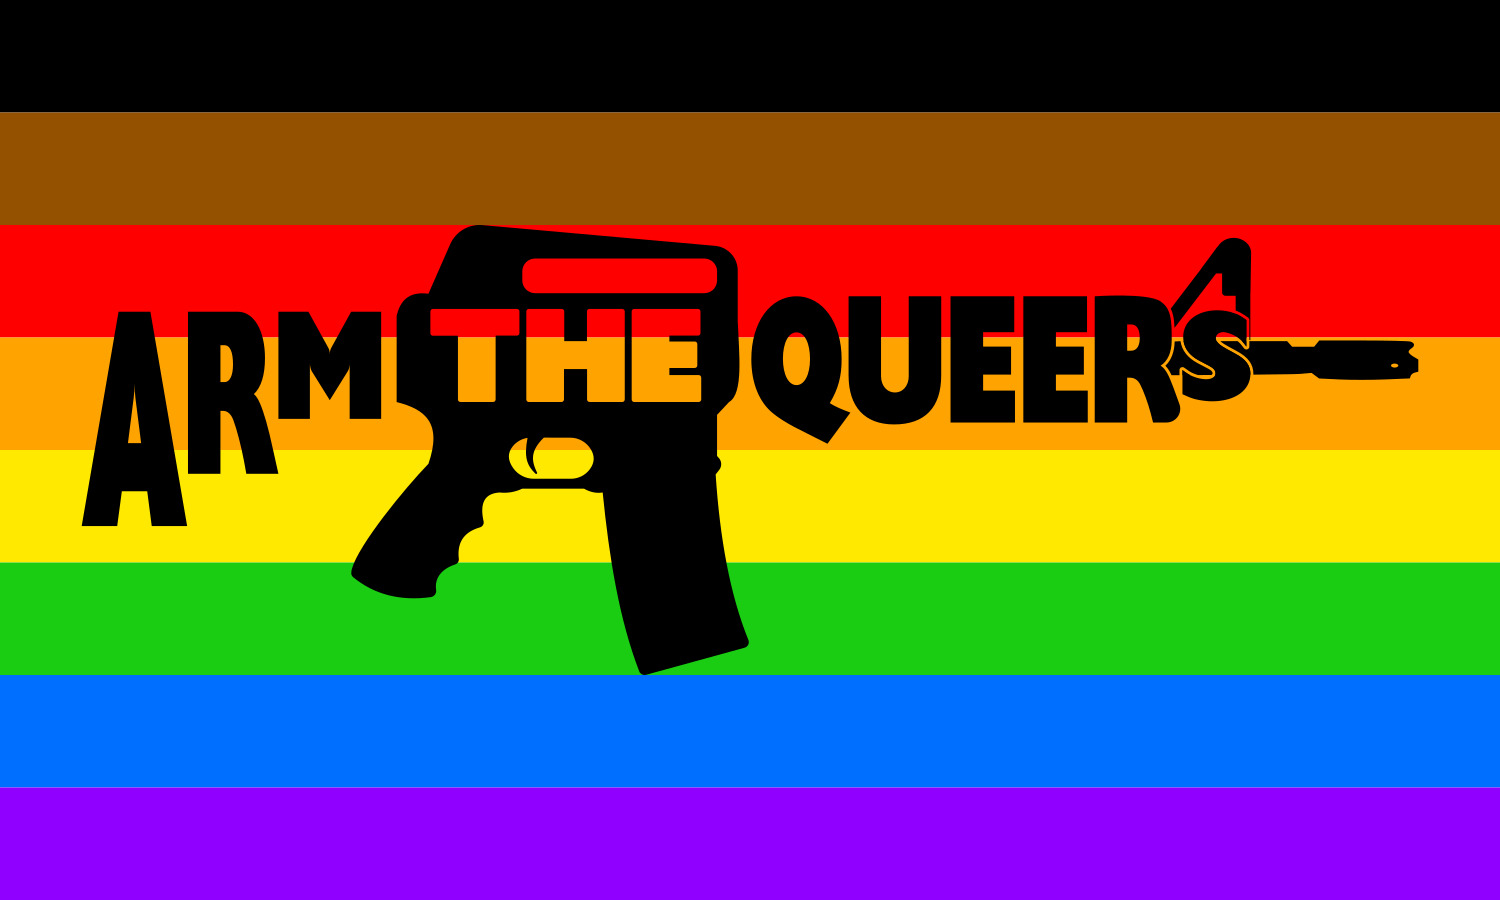 Arm the queer (philly)